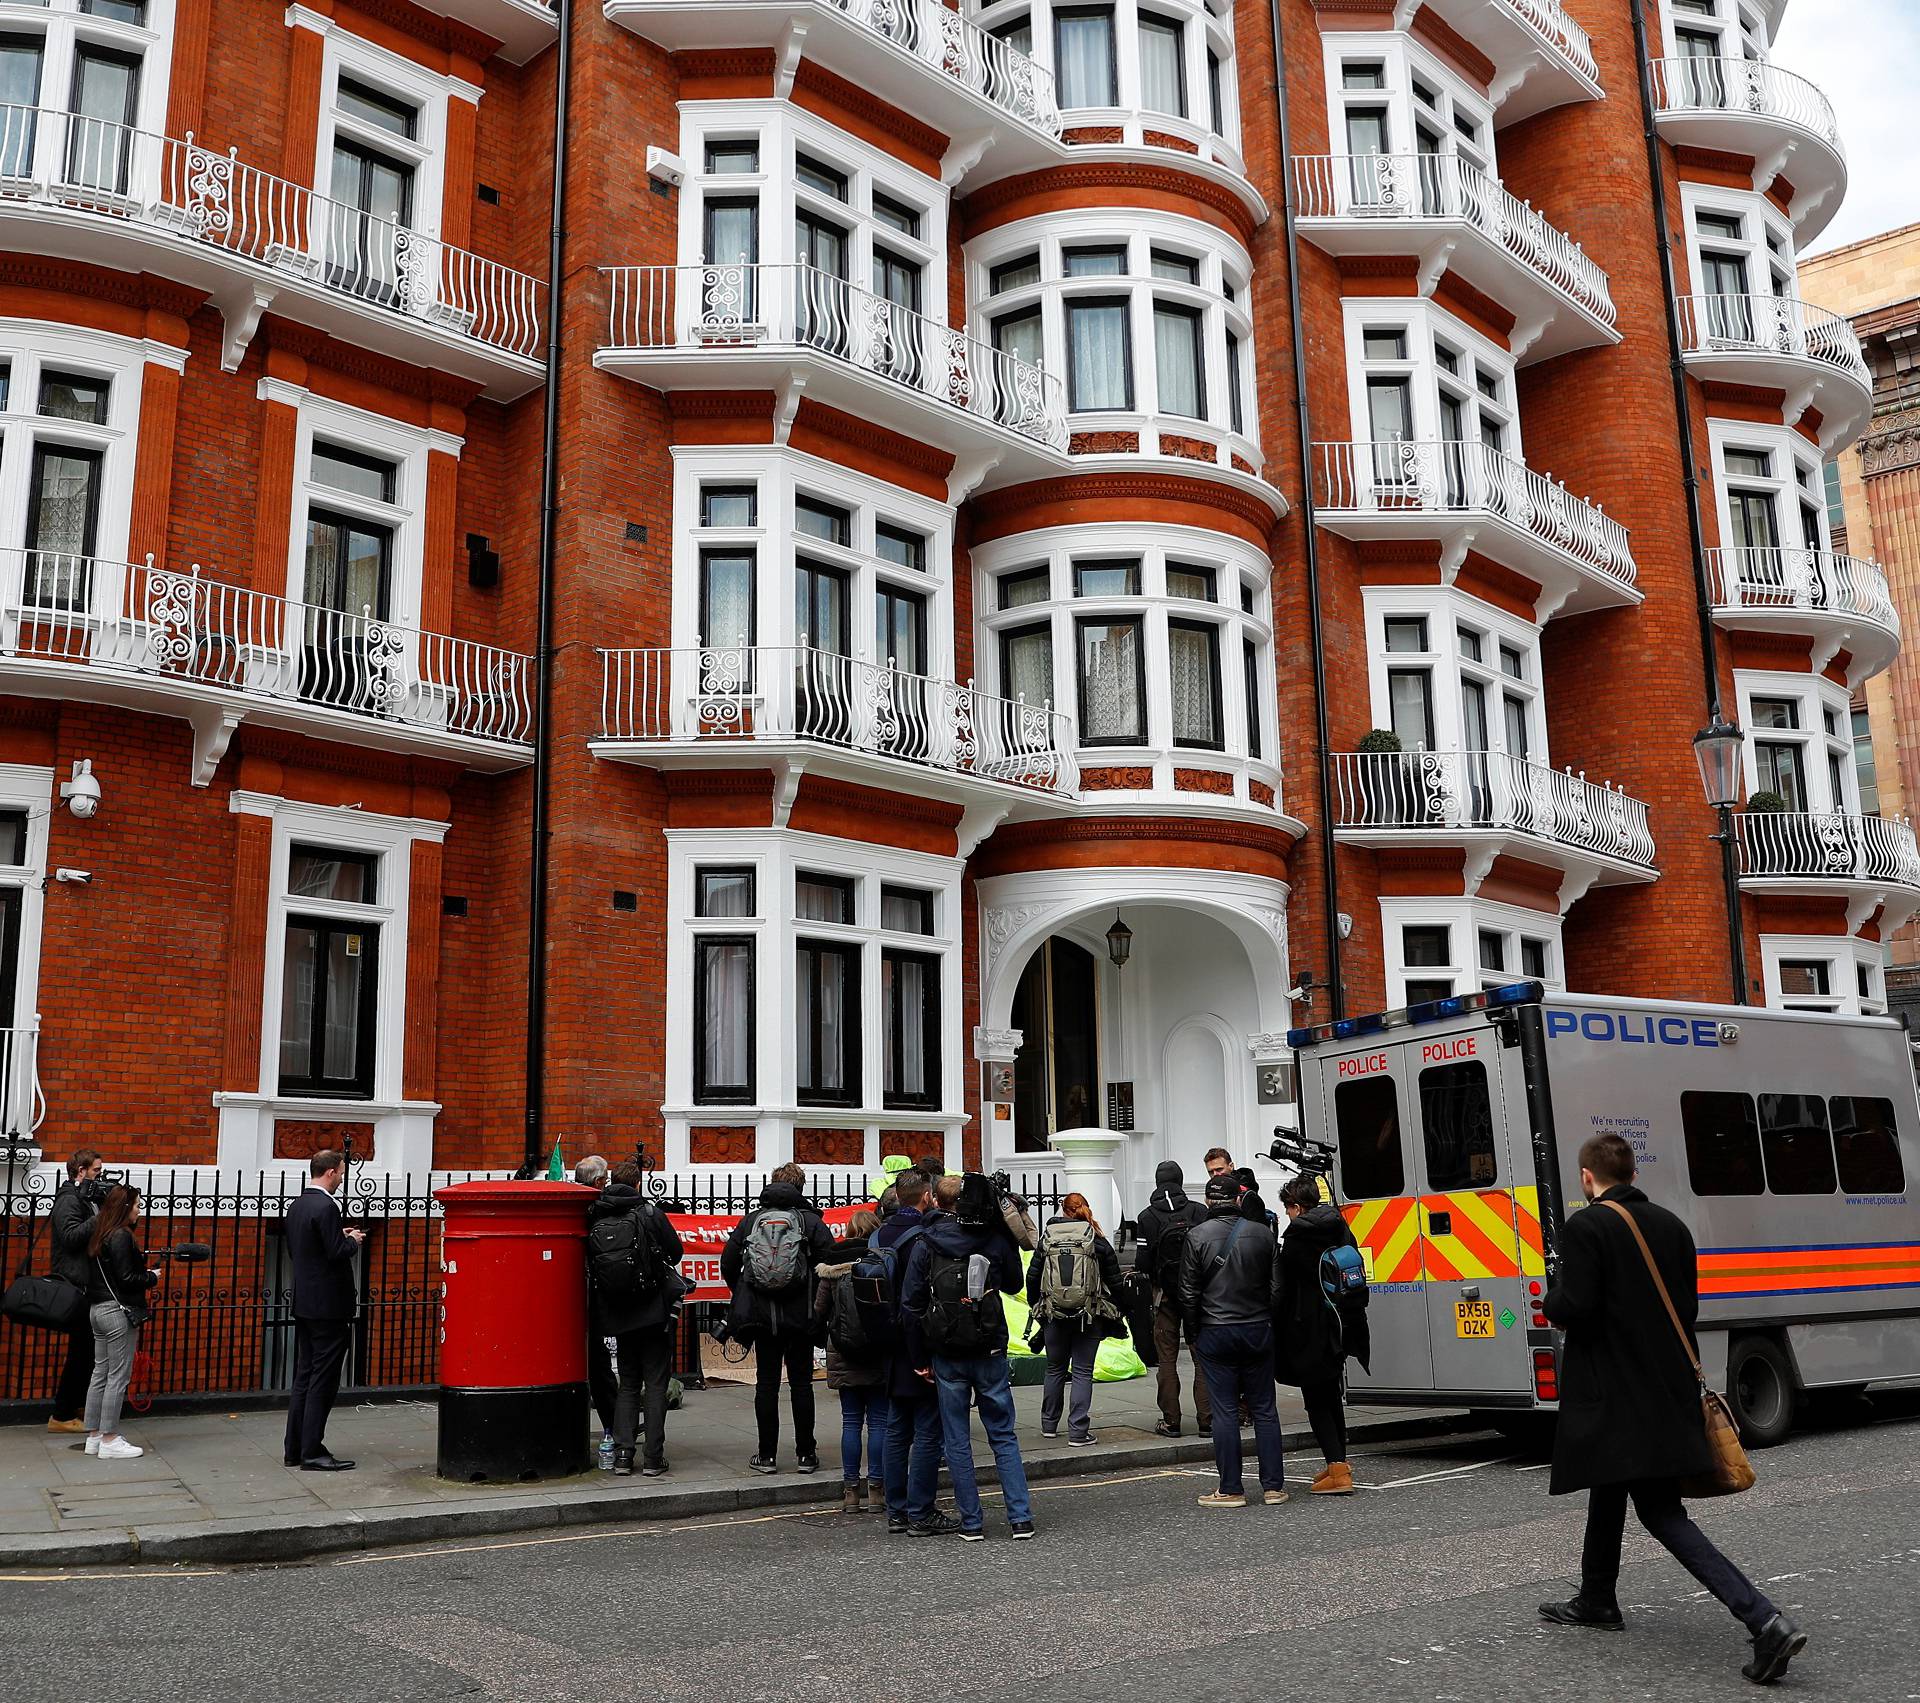 A police van is seen outside the Ecuadorian embassy after WikiLeaks founder Julian Assange was arrested by British police in London